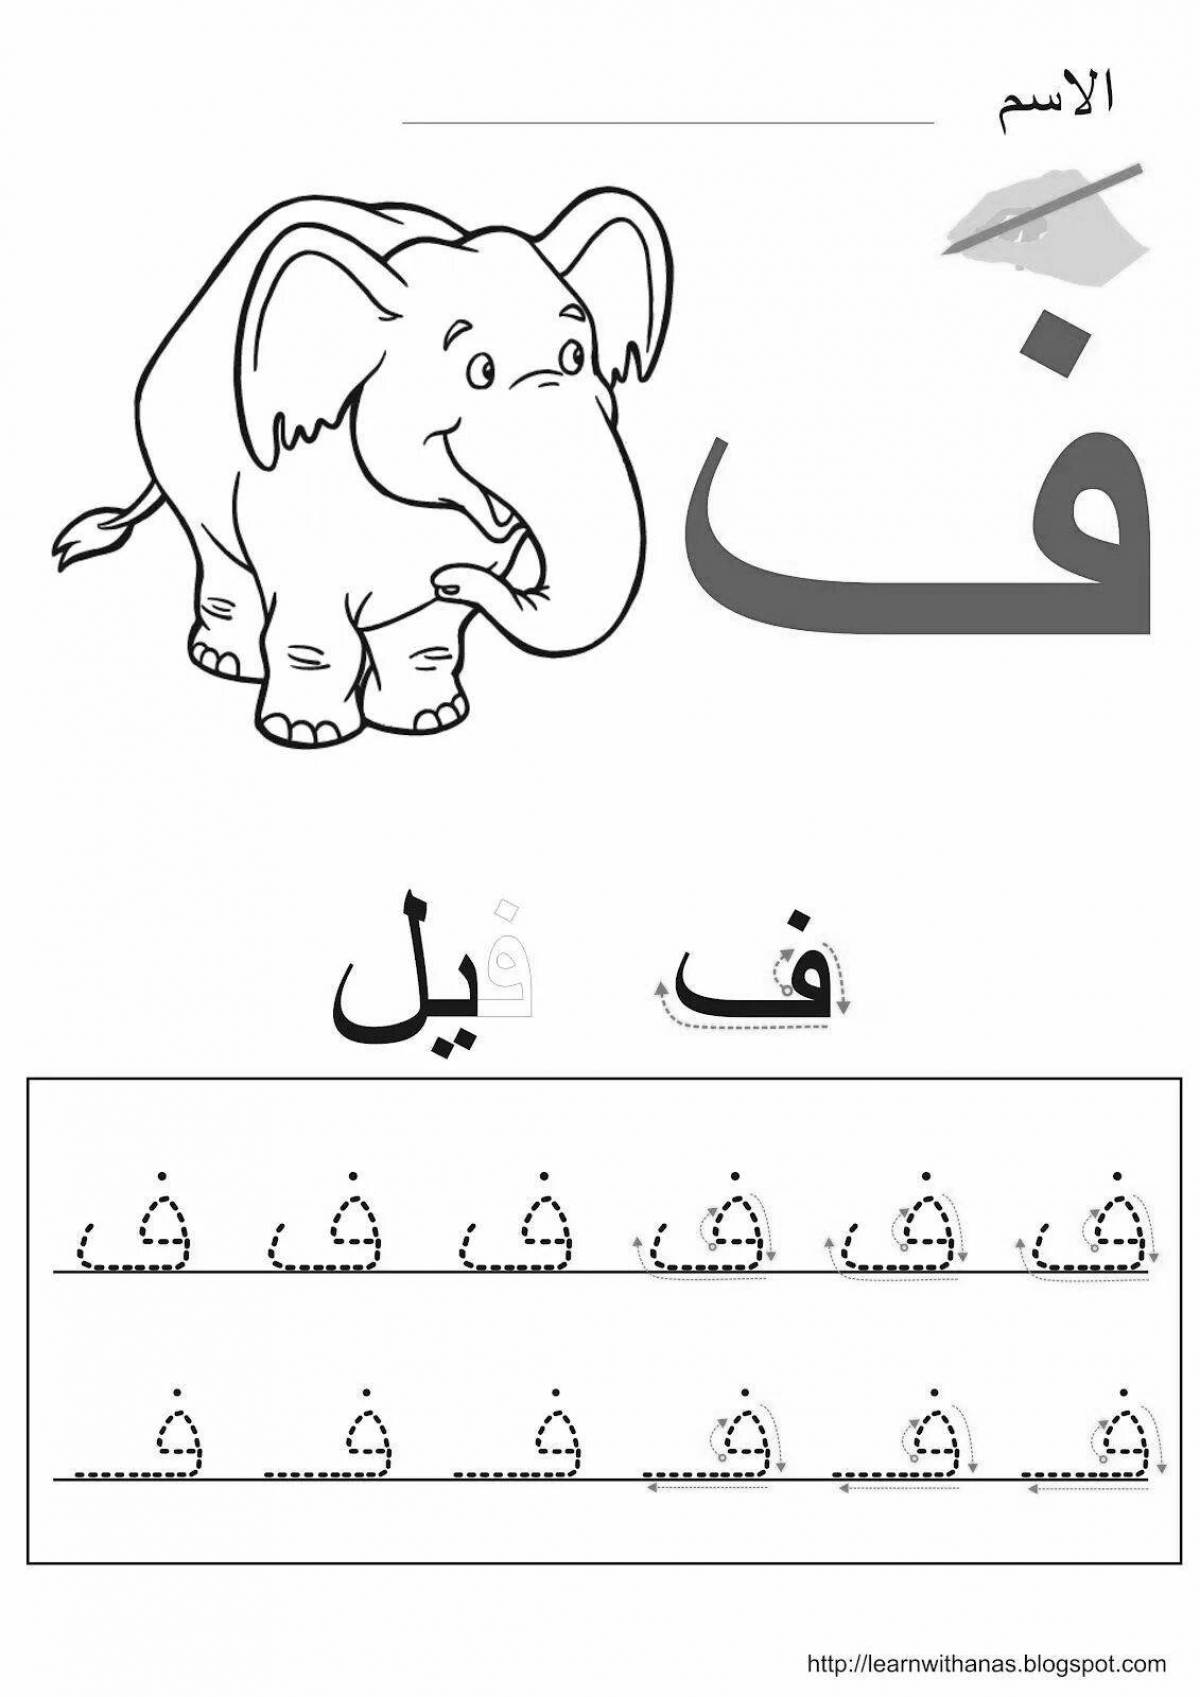 Colorful Arabic alphabet coloring page for little learners